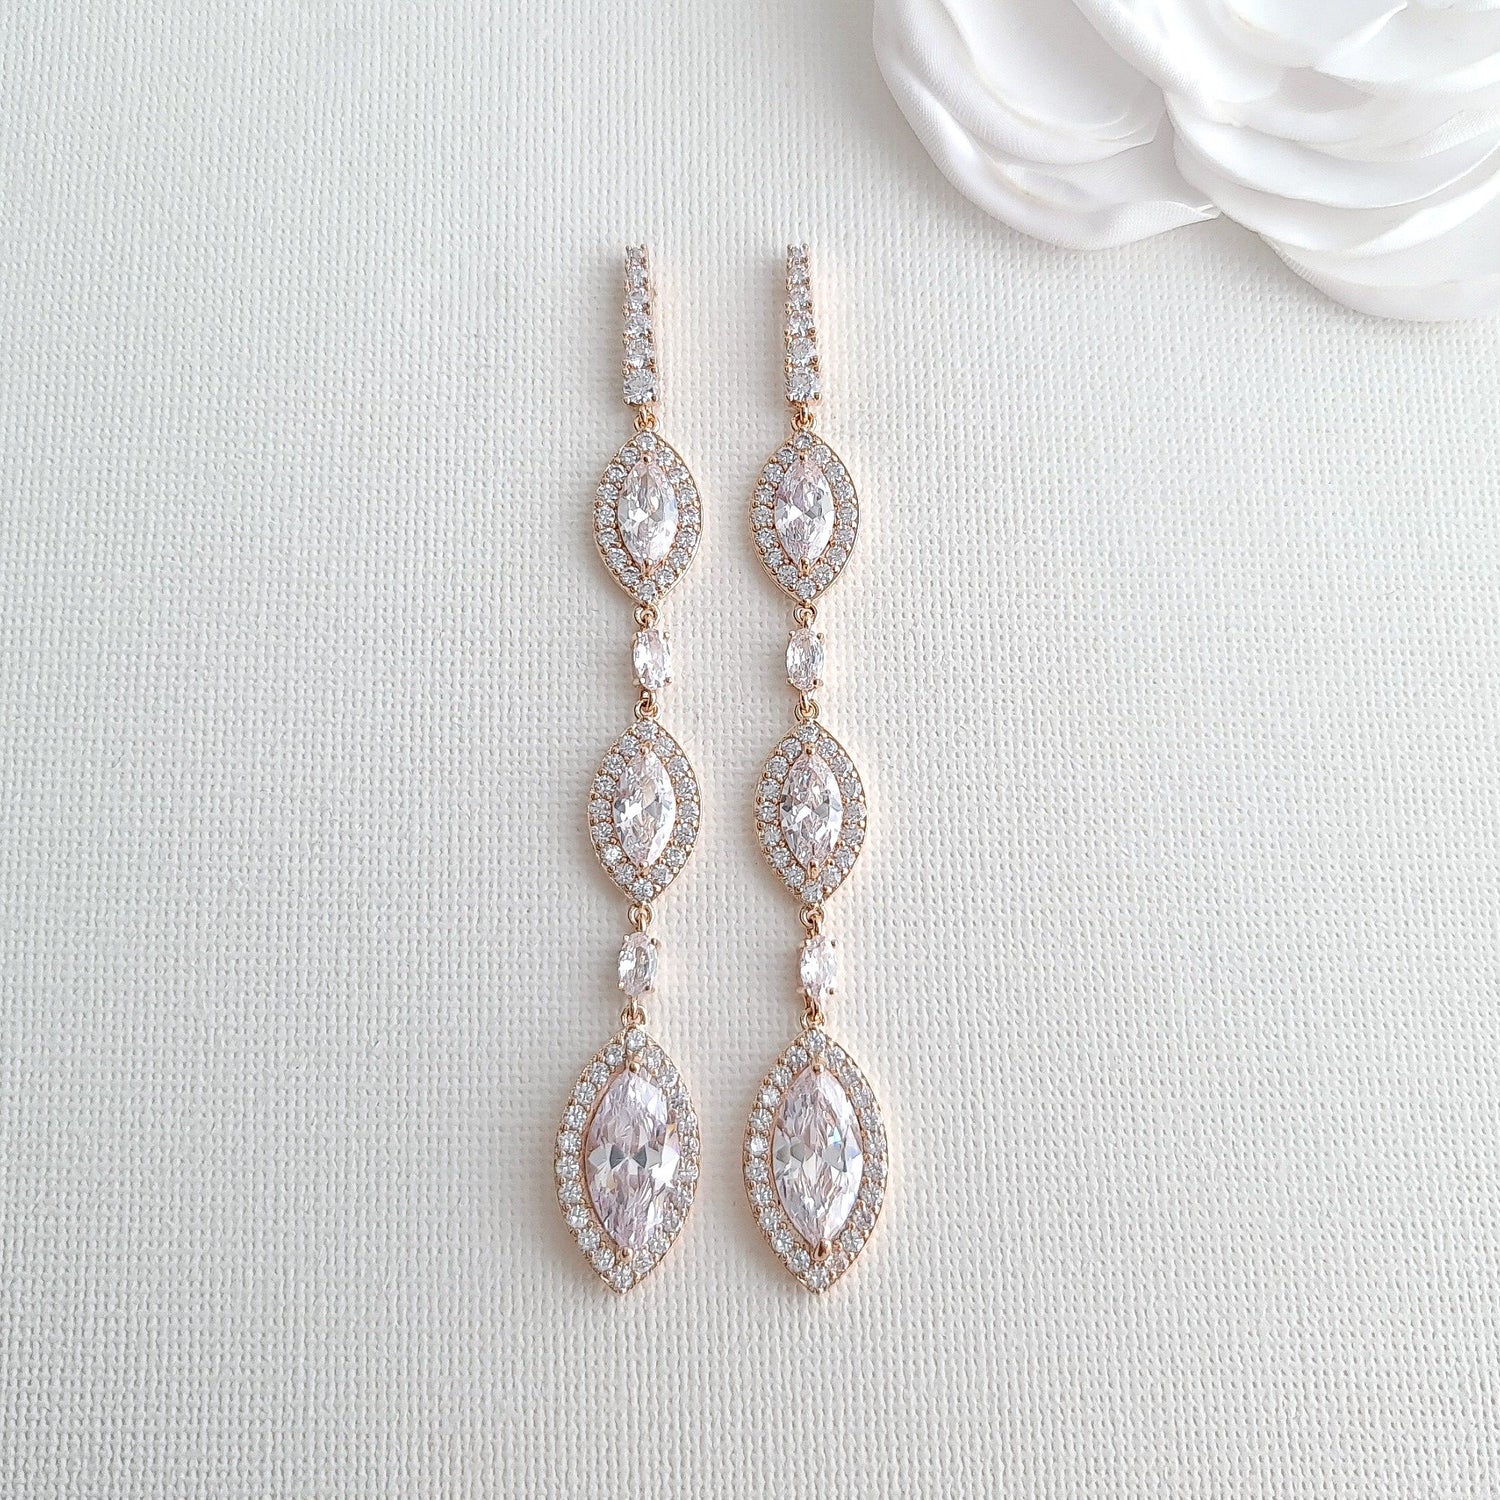 Extra Long Rose Gold Earrings for Wedding and Prom- Harriet